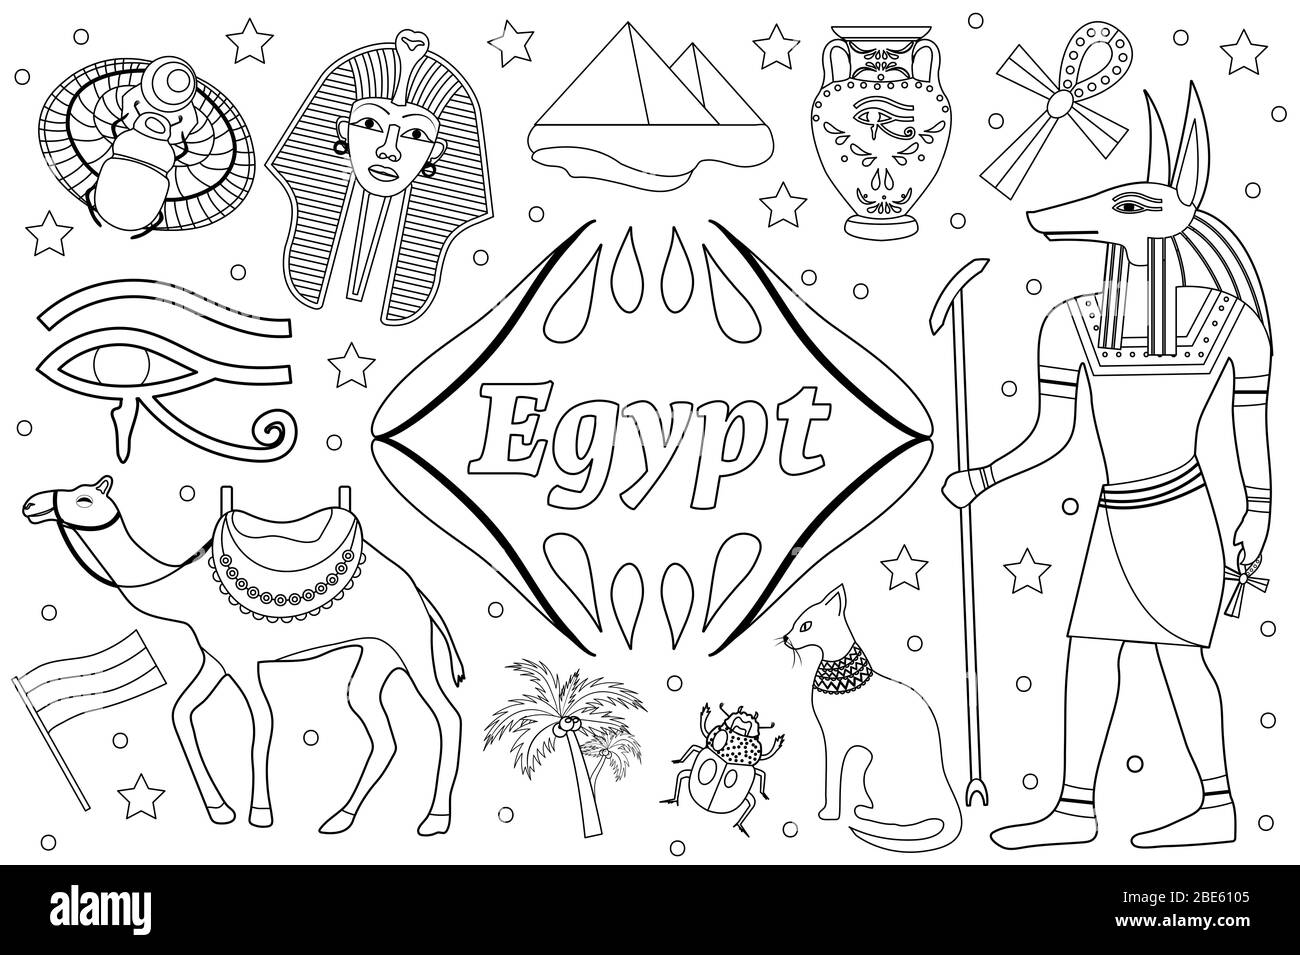 Ancient magic Egypt set objects objects. Coloring book page for kids. Collection design elements witch sorrow beetles, pharaoh, pyramid, ankh, anubis Stock Photo